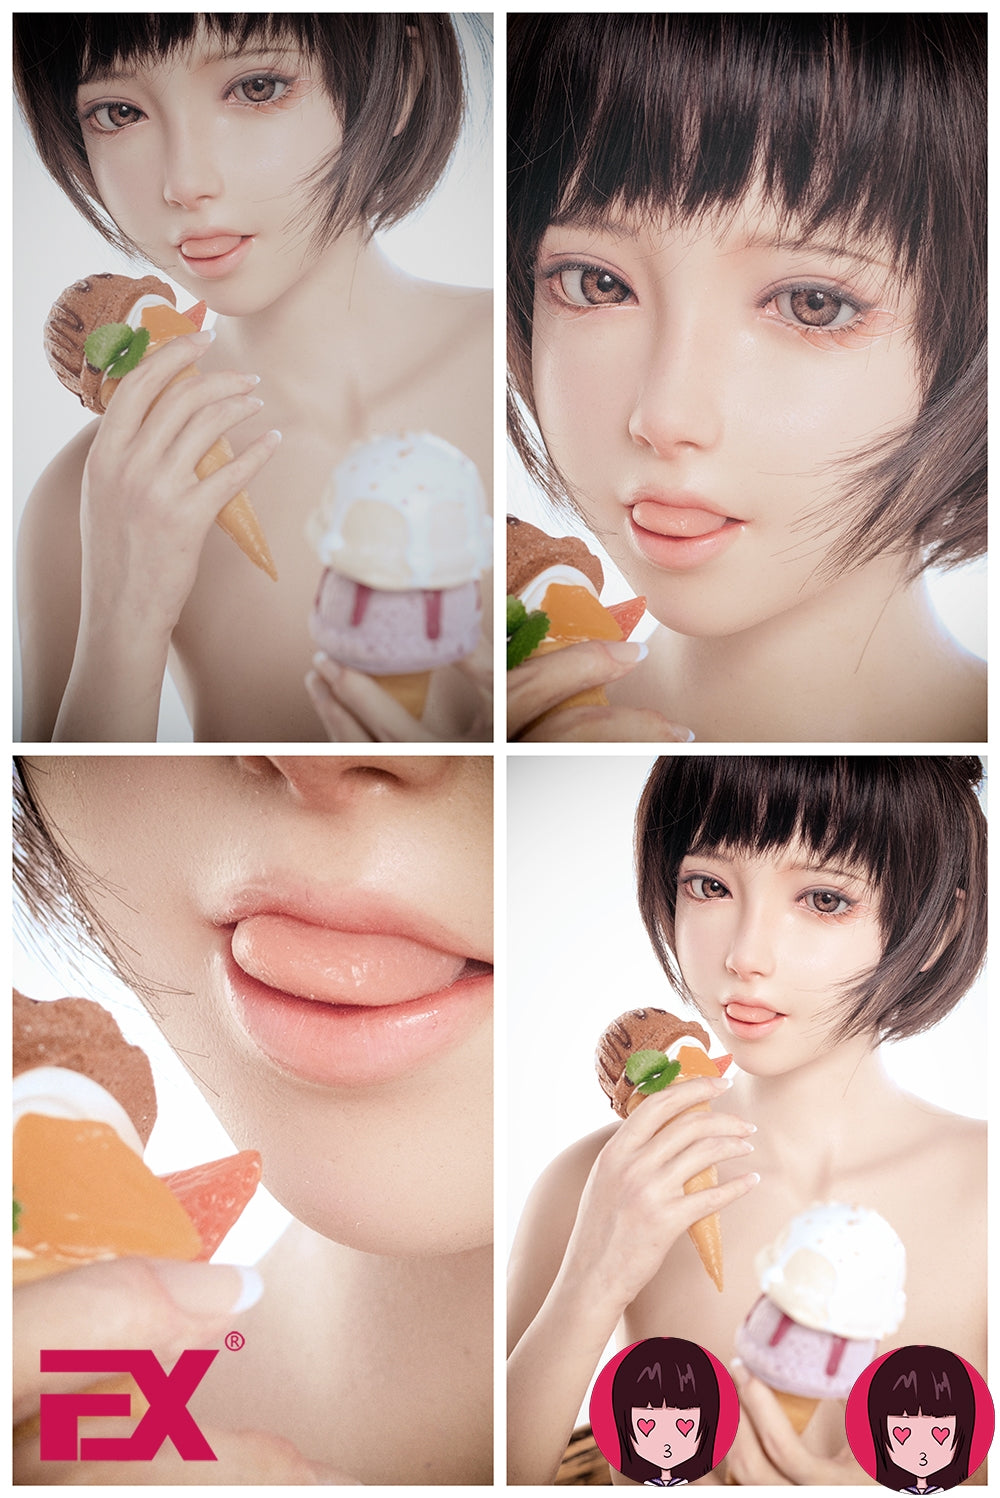 EX Doll Summit Series 149 cm Silicone - Yao | Buy Sex Dolls at DOLLS ACTUALLY